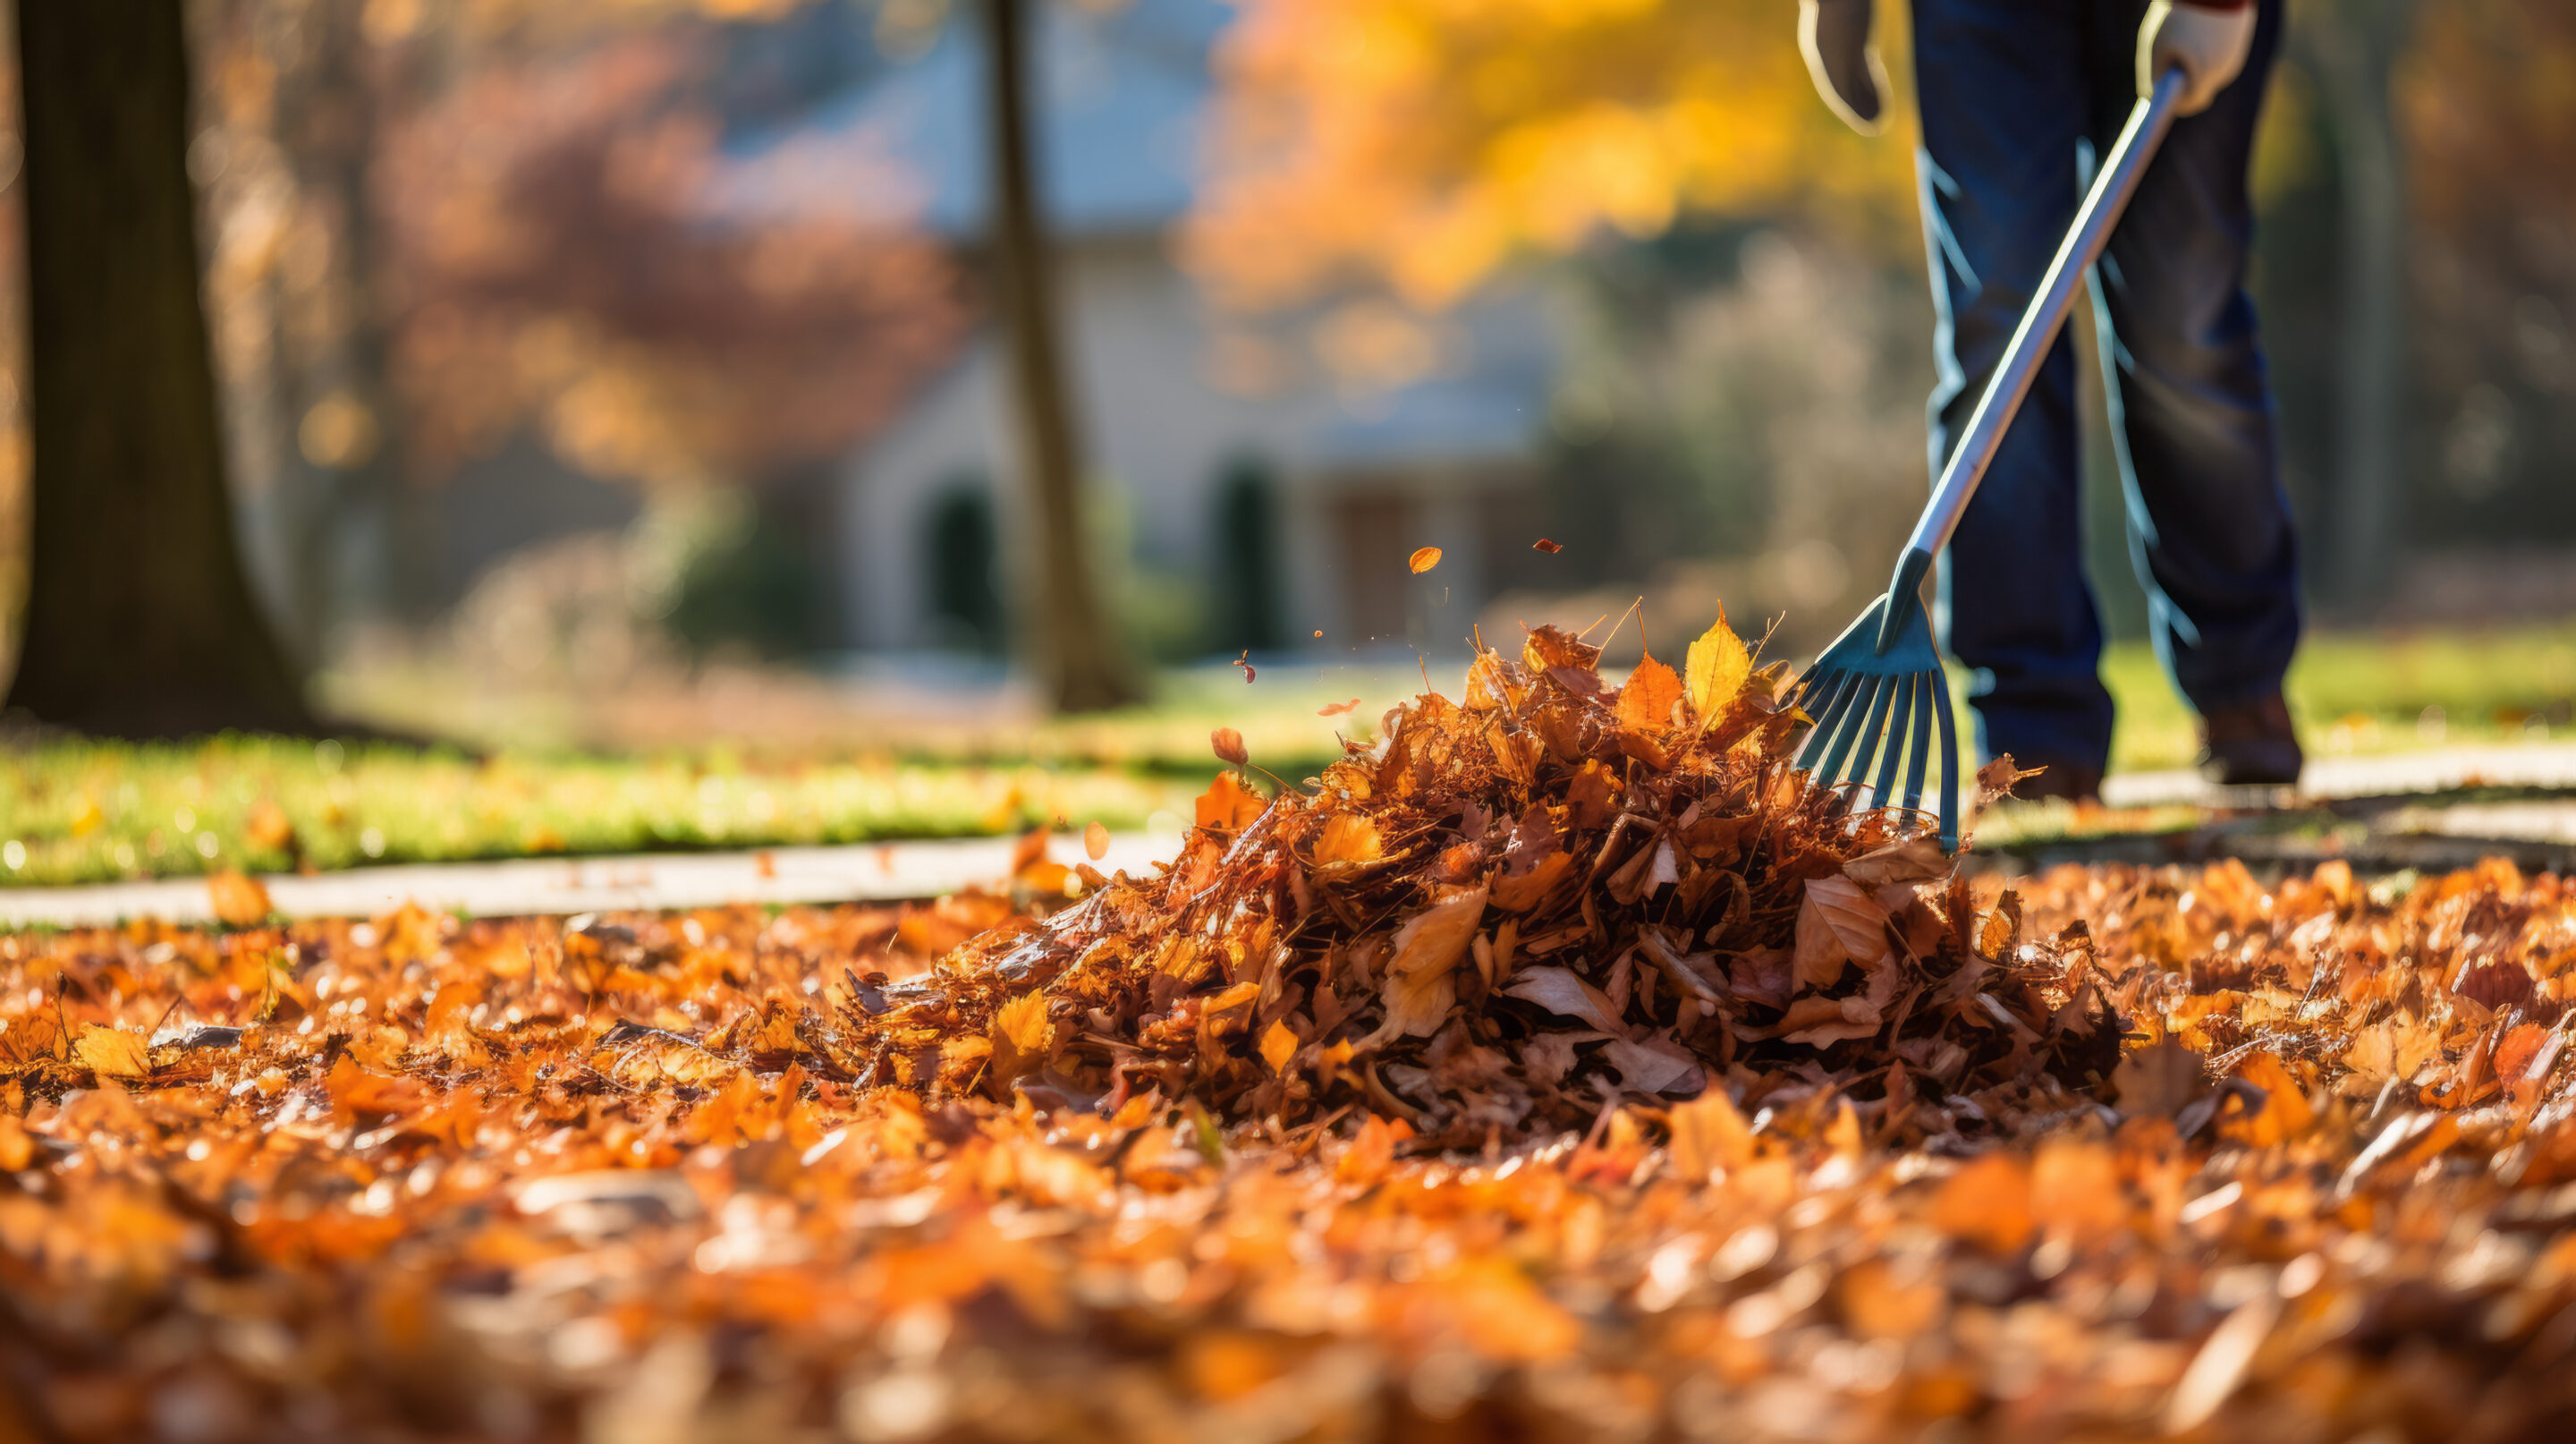 Pest Control Tips for This Fall